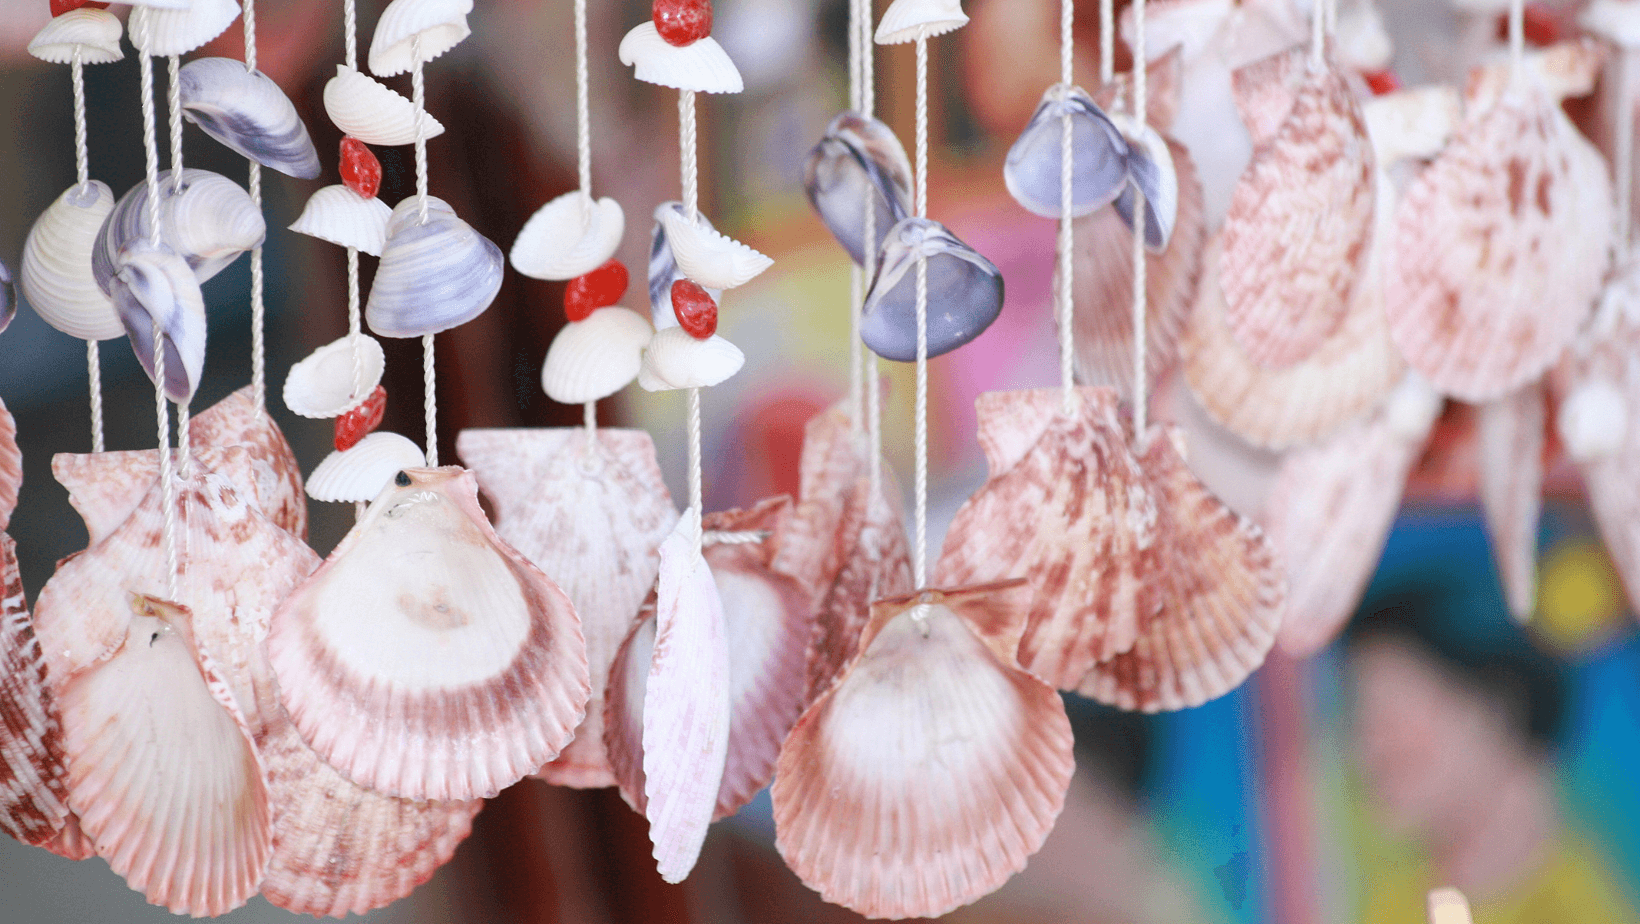 a colorful wind chime hangs